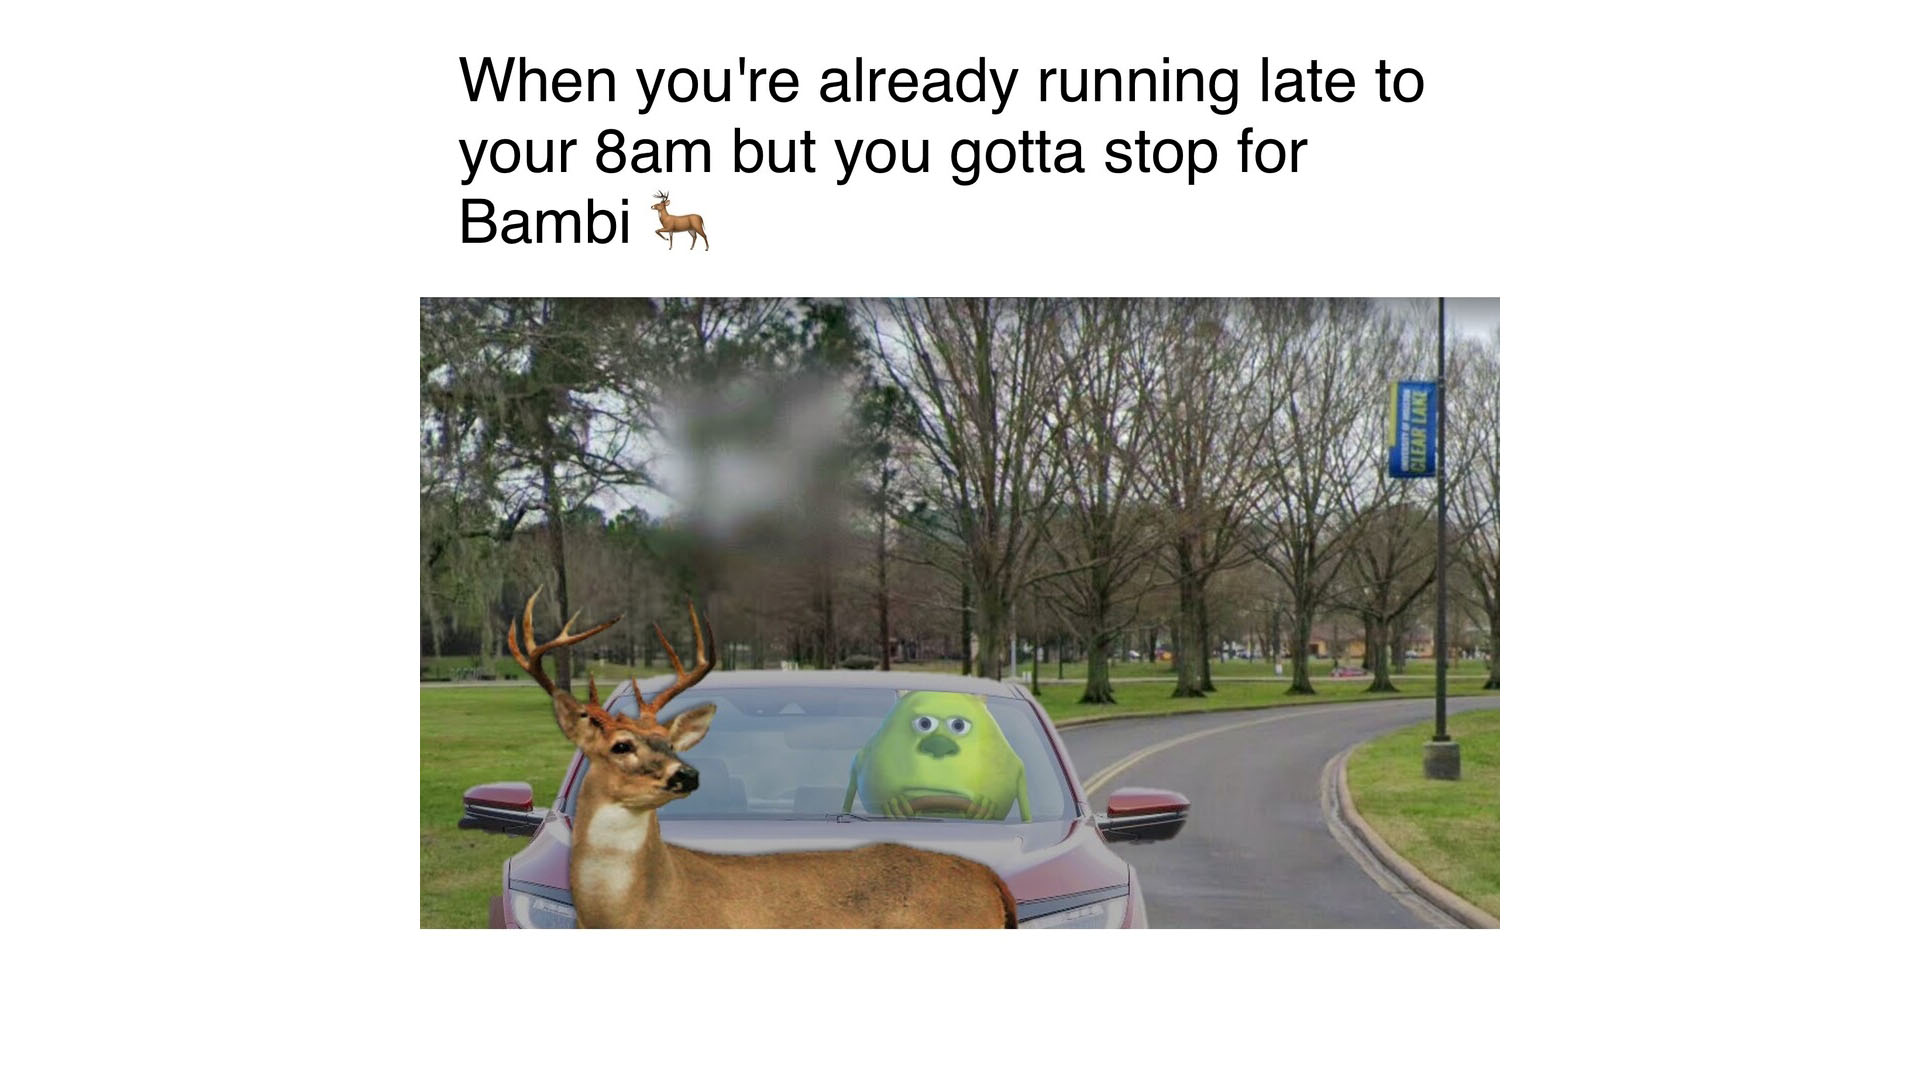 Title: When you're already running late to your 8 am but you gotta stop for Bambi. Monsters Inc sits in a car on the road waiting for a deer to pass.